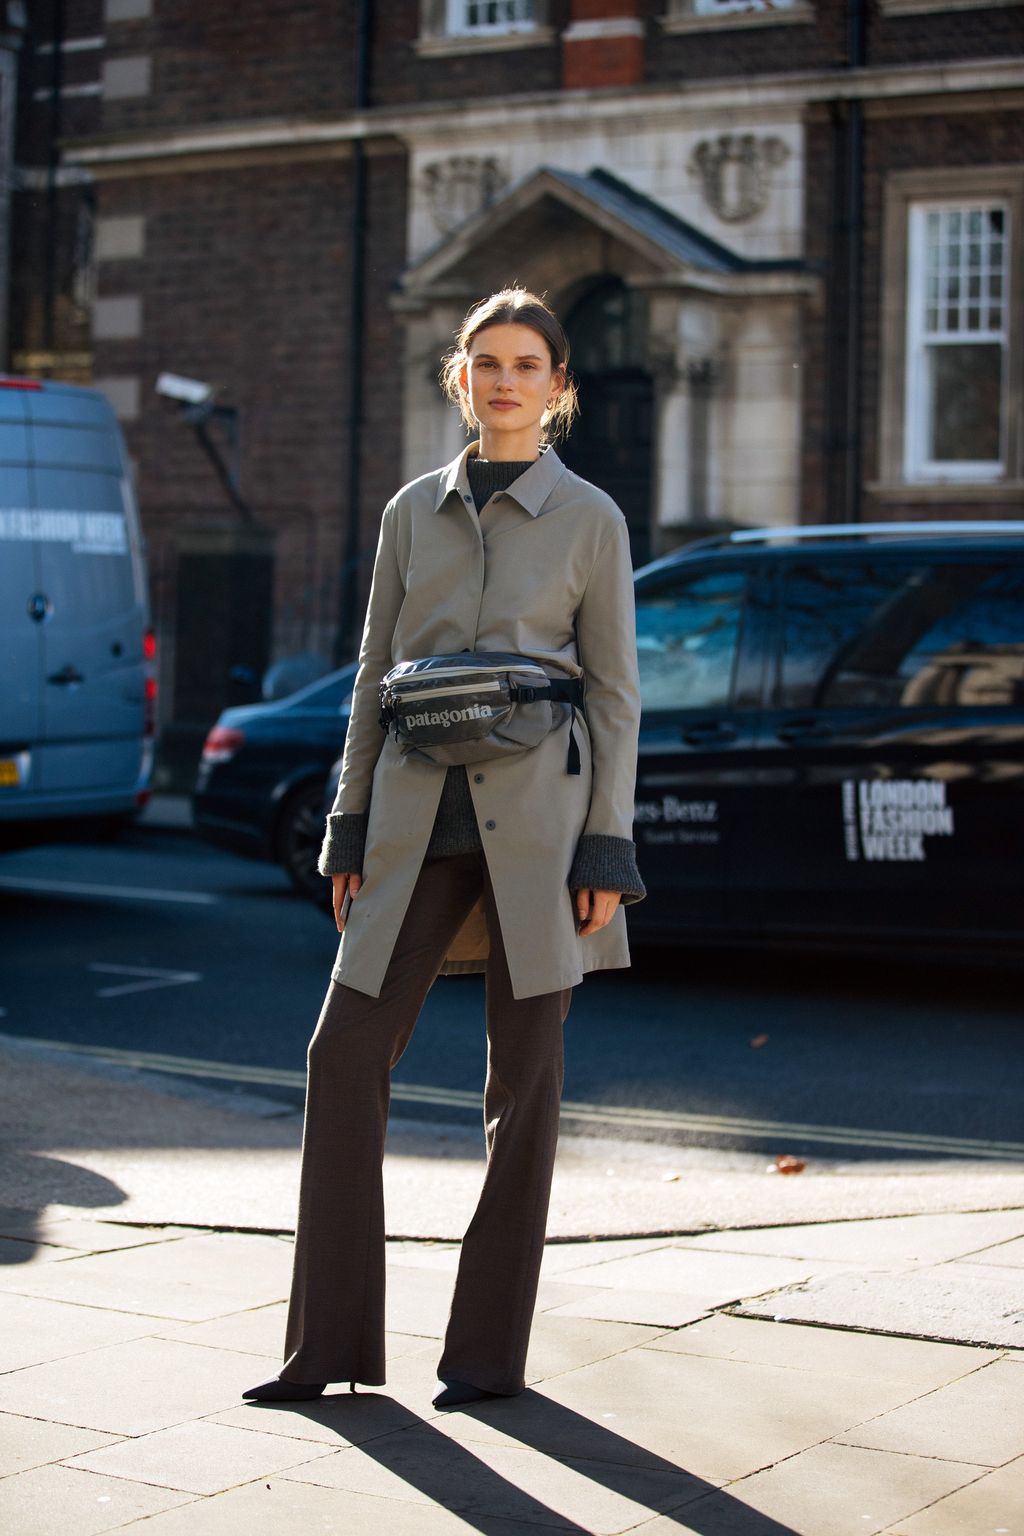 LONDON, ENGLAND - FEBRUARY 17: Model Giedre Dukauskaite wears a gray jacket, Patagonia fanny pack,, and brown trousers after Victoria Beckham during London Fashion Week February 2019 on February 17, 2019 in London, England. (Photo by Melodie Jeng/Getty Images)